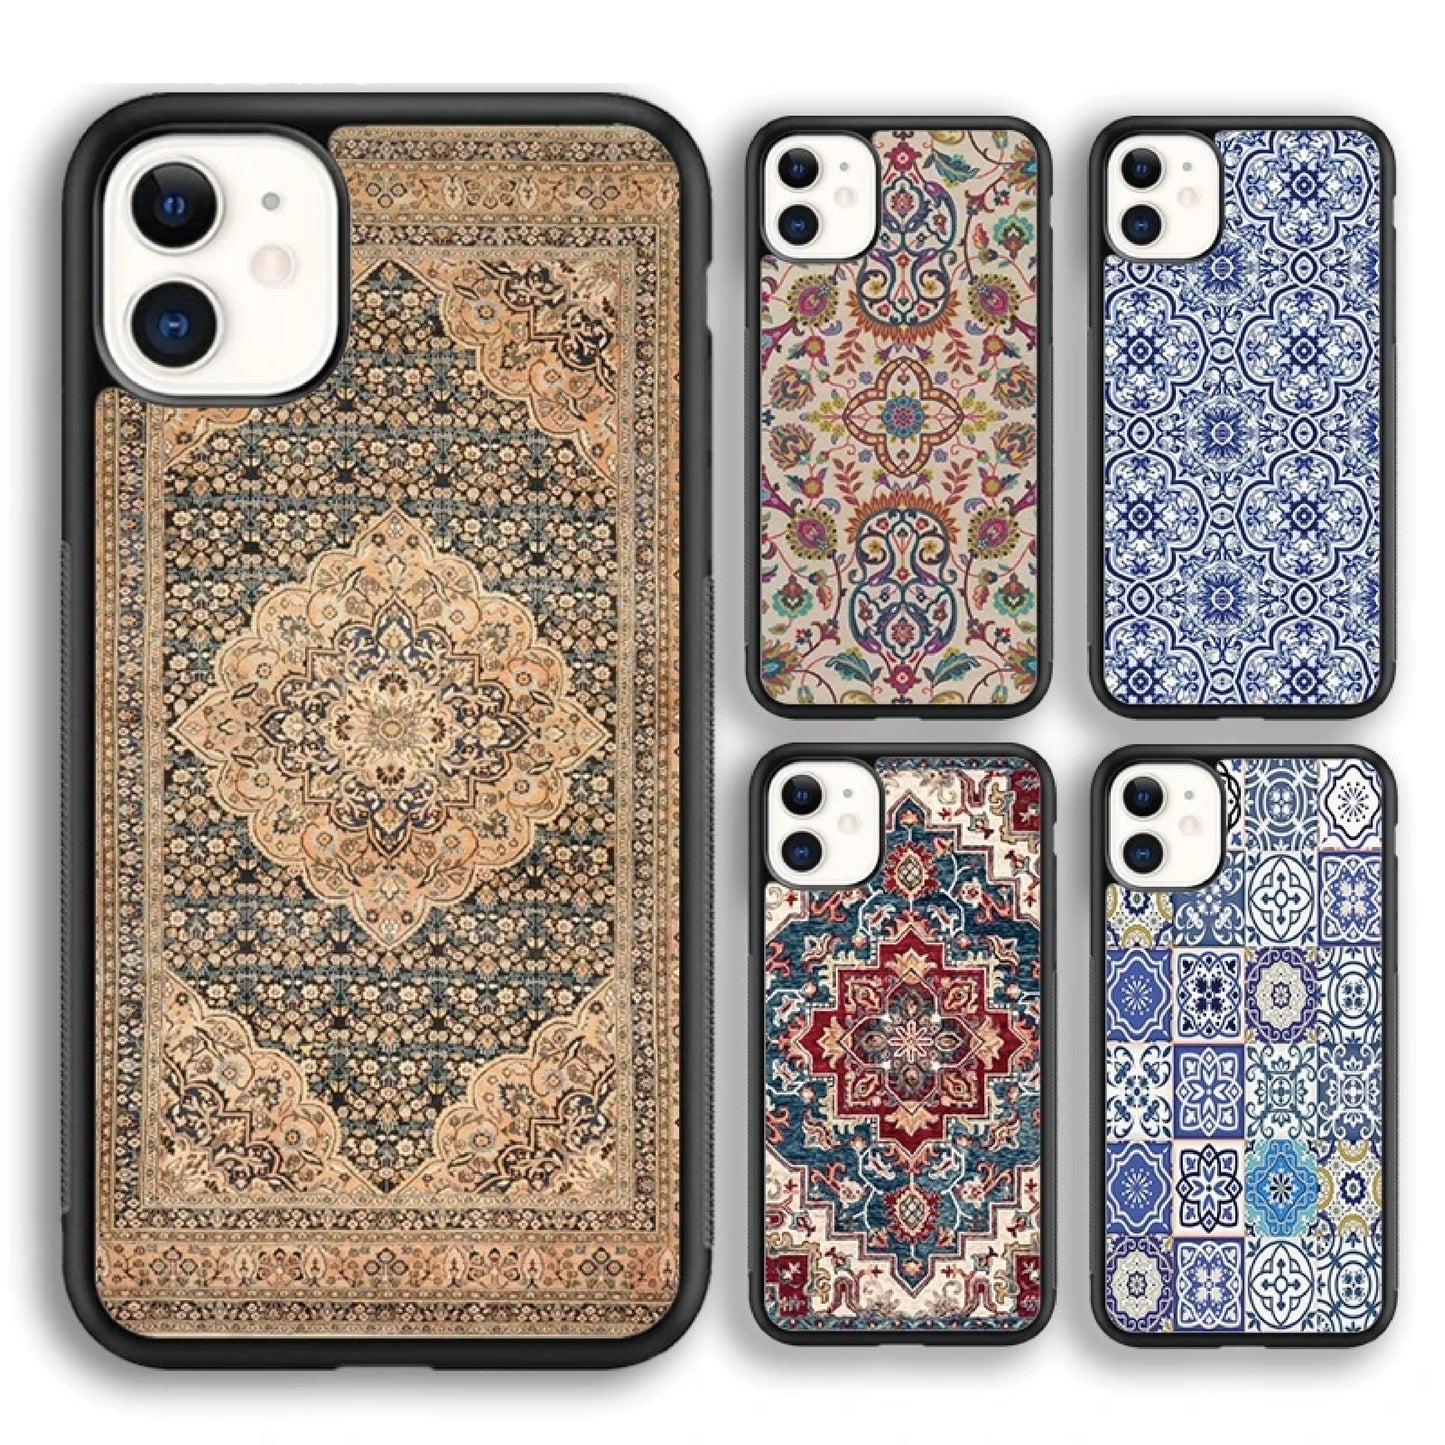 MOROCCAN FLORAL | Iphone Case #03